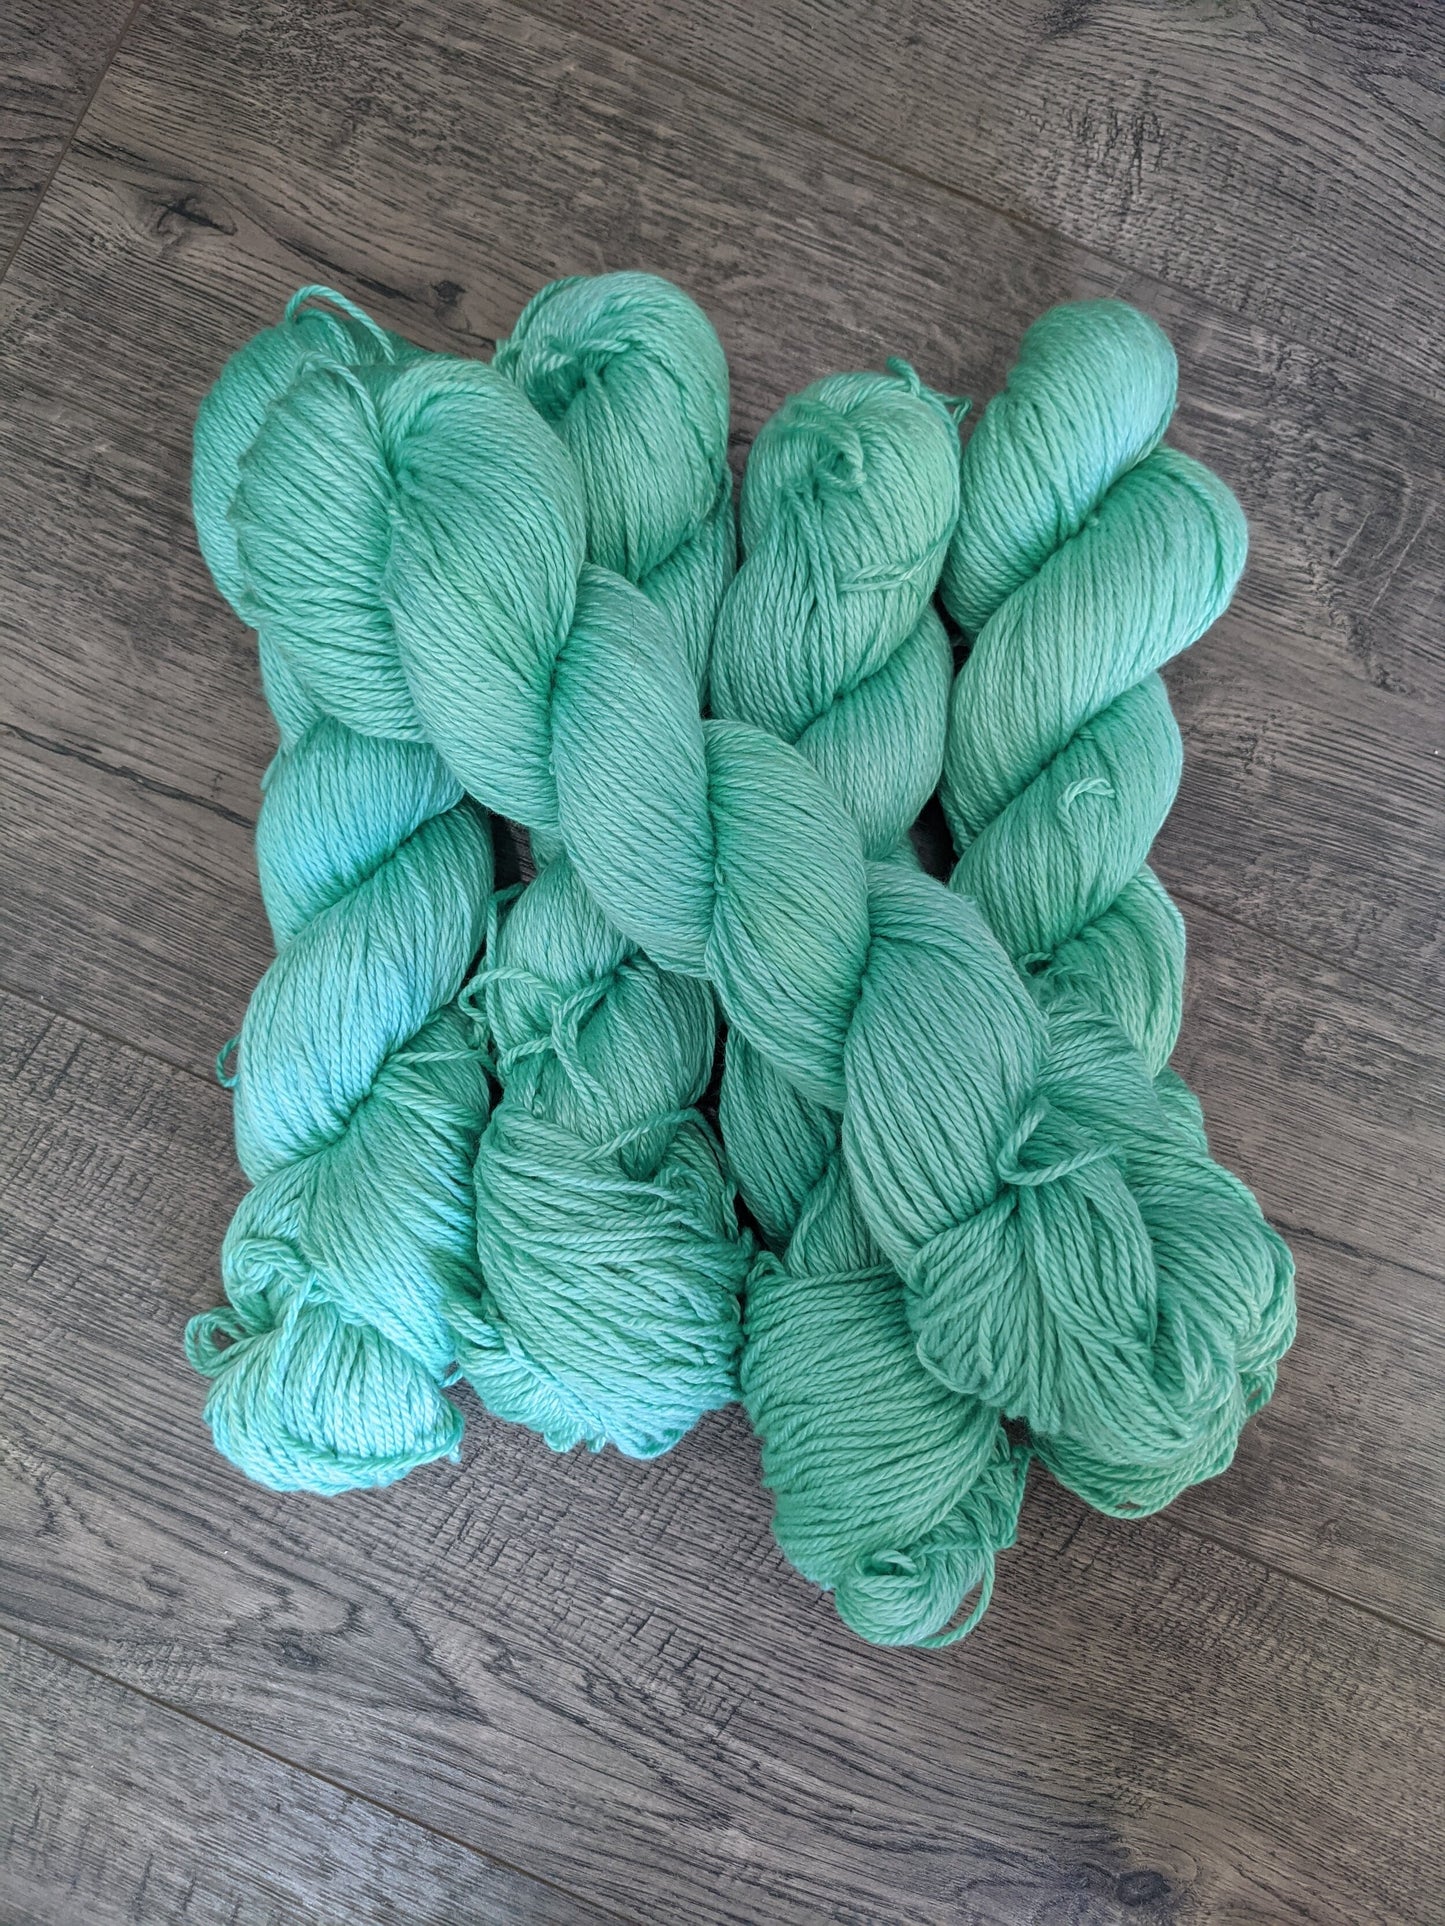 Judd Cove Collection: Worsted Weight